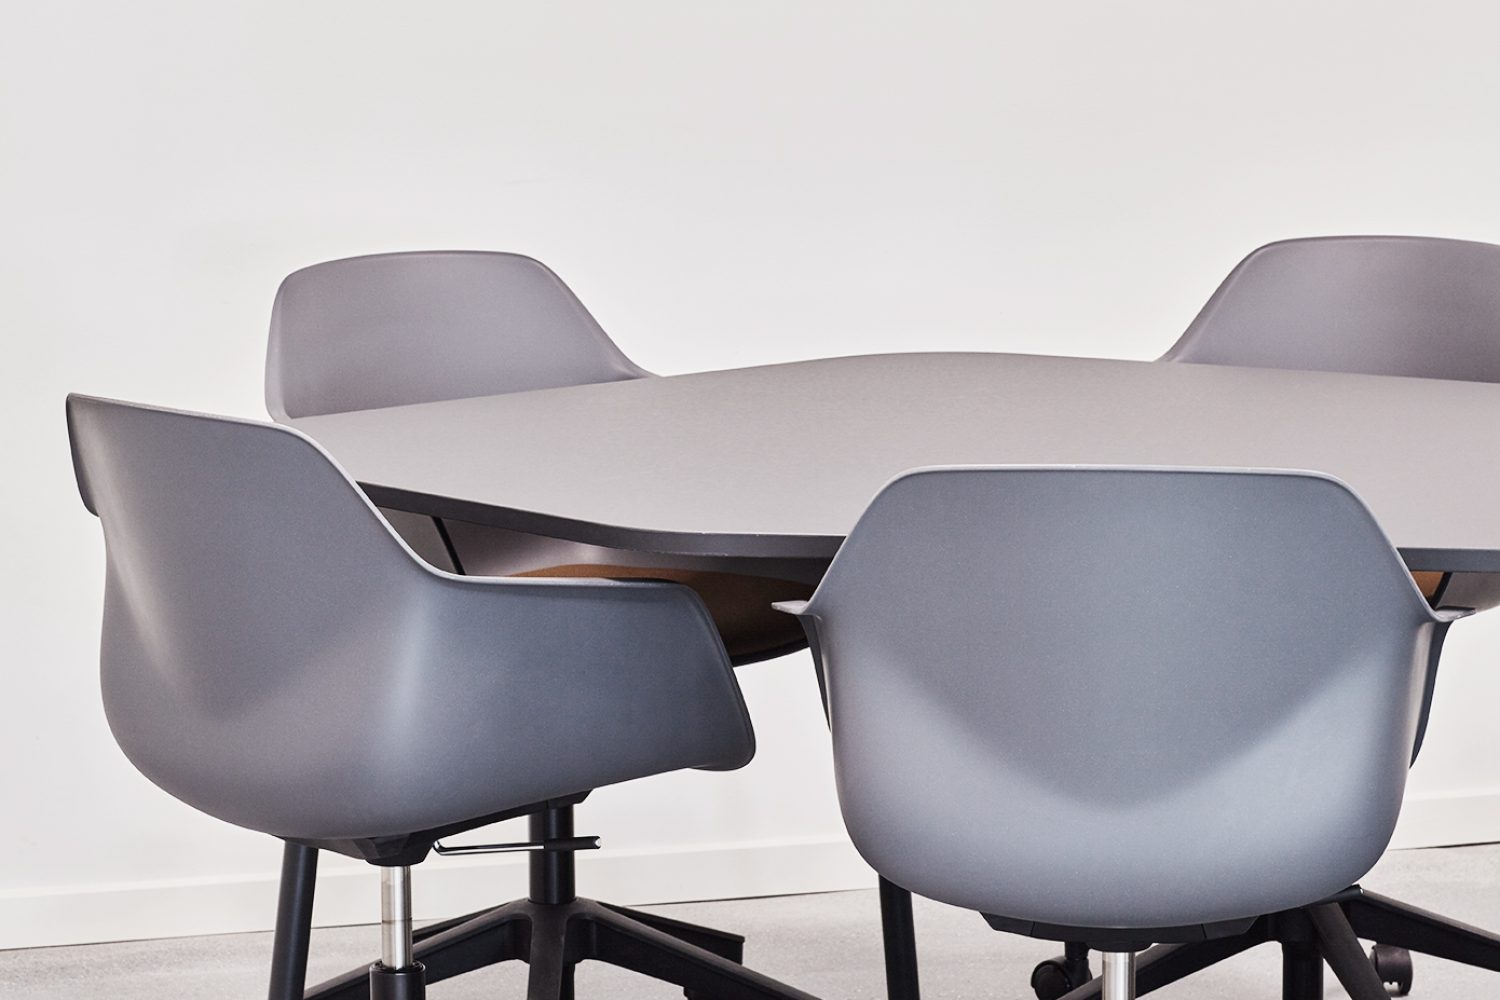 Four grey office desk chairs and a round table in an office.